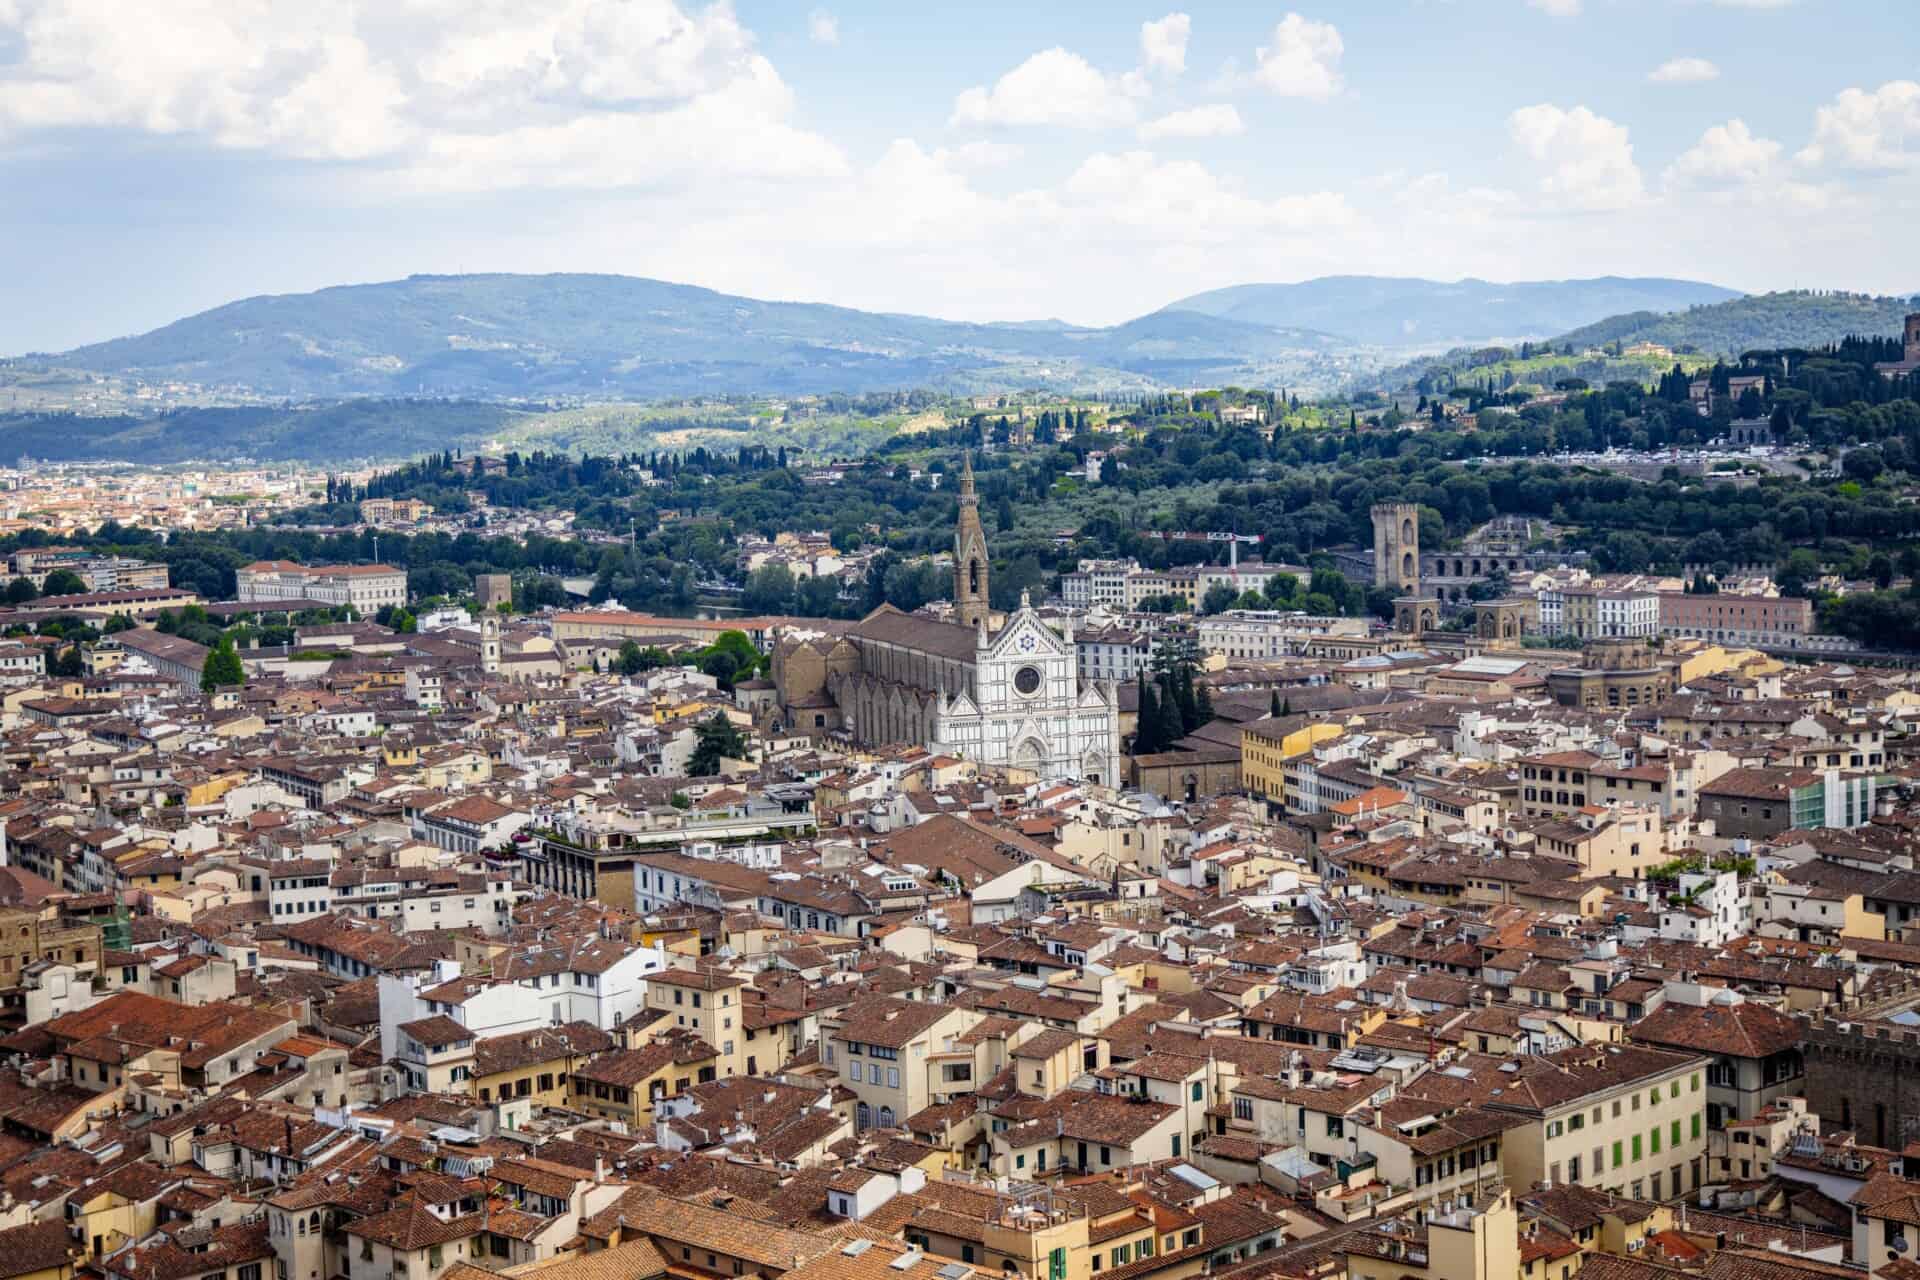 A view over the city of Florence